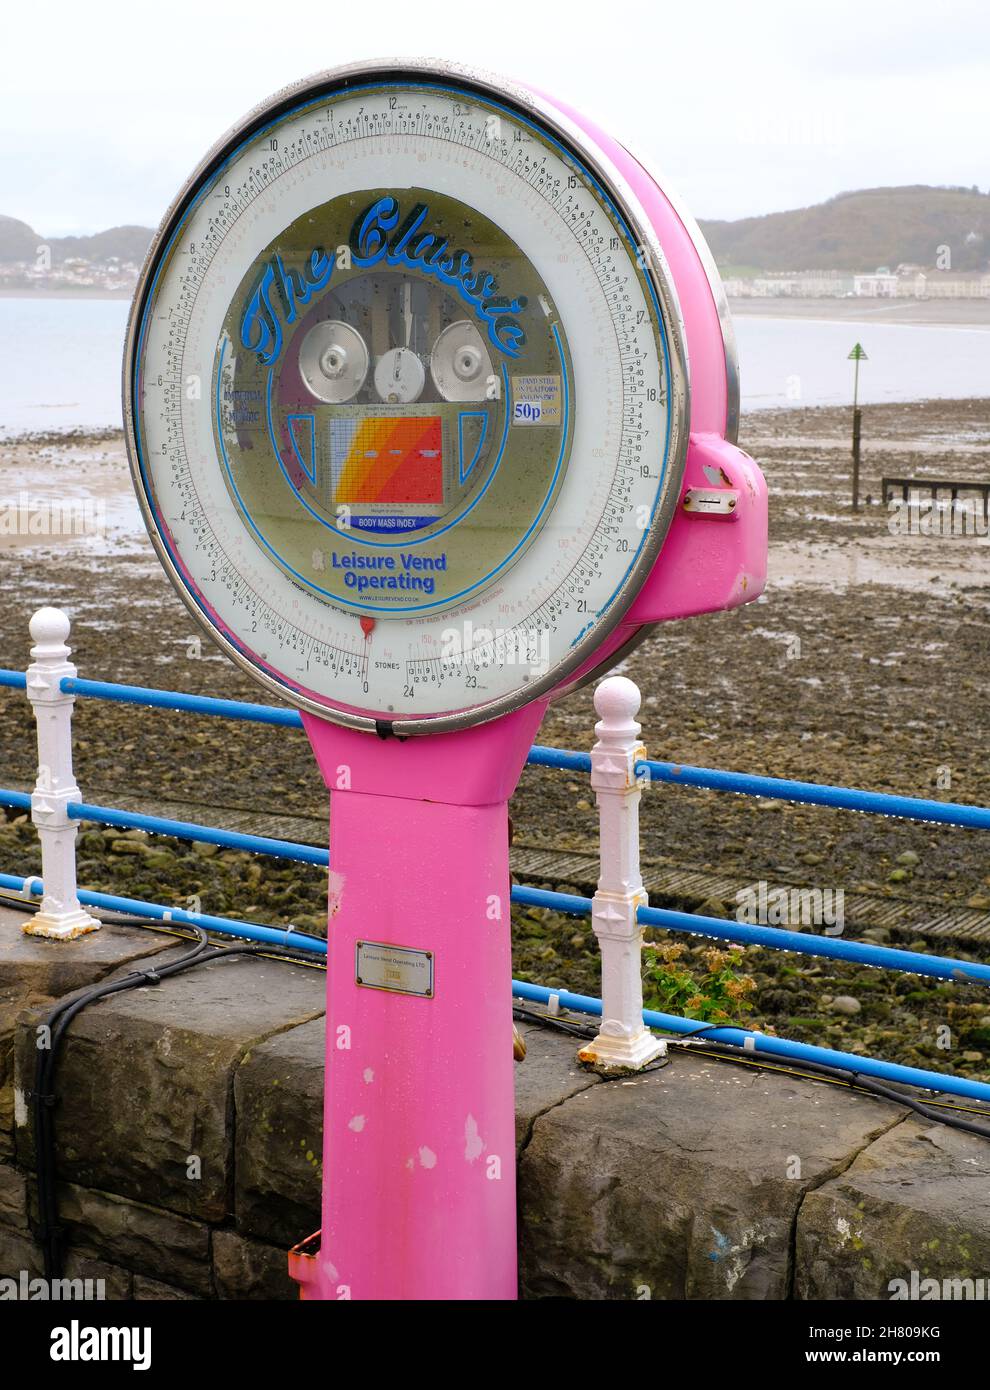 https://c8.alamy.com/comp/2H809KG/a-bright-pink-traditional-weighing-machine-stands-on-the-pier-at-llandudno-and-contrasts-with-the-muted-tones-of-the-rocky-beach-beyond-2H809KG.jpg